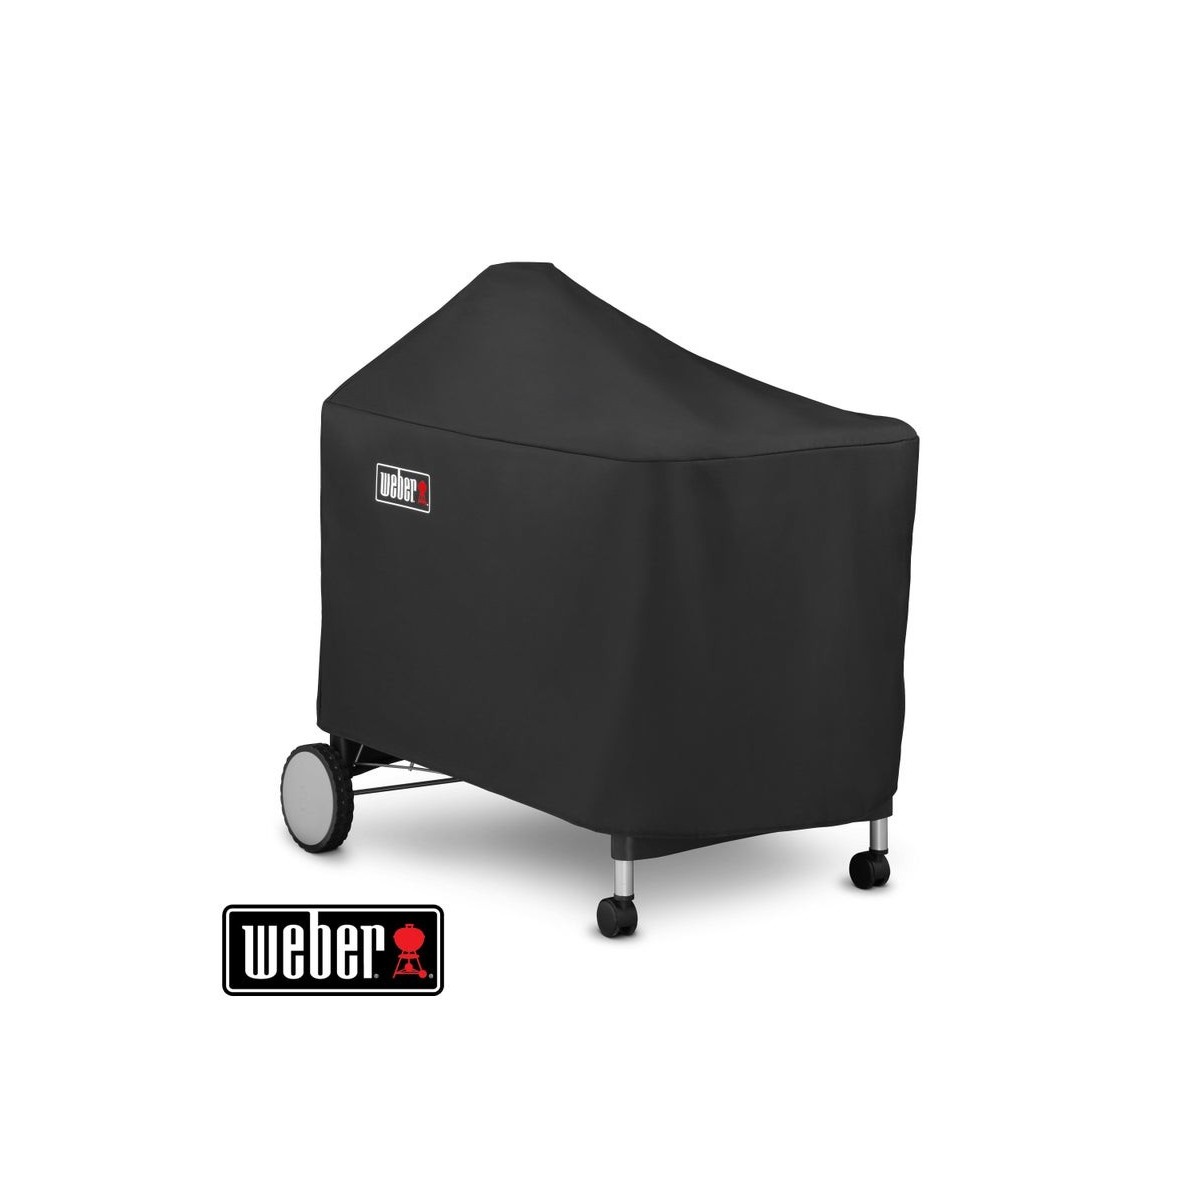 WEBER Premium Barbecue Cover - Fits Performer Premium and Deluxe, 7146